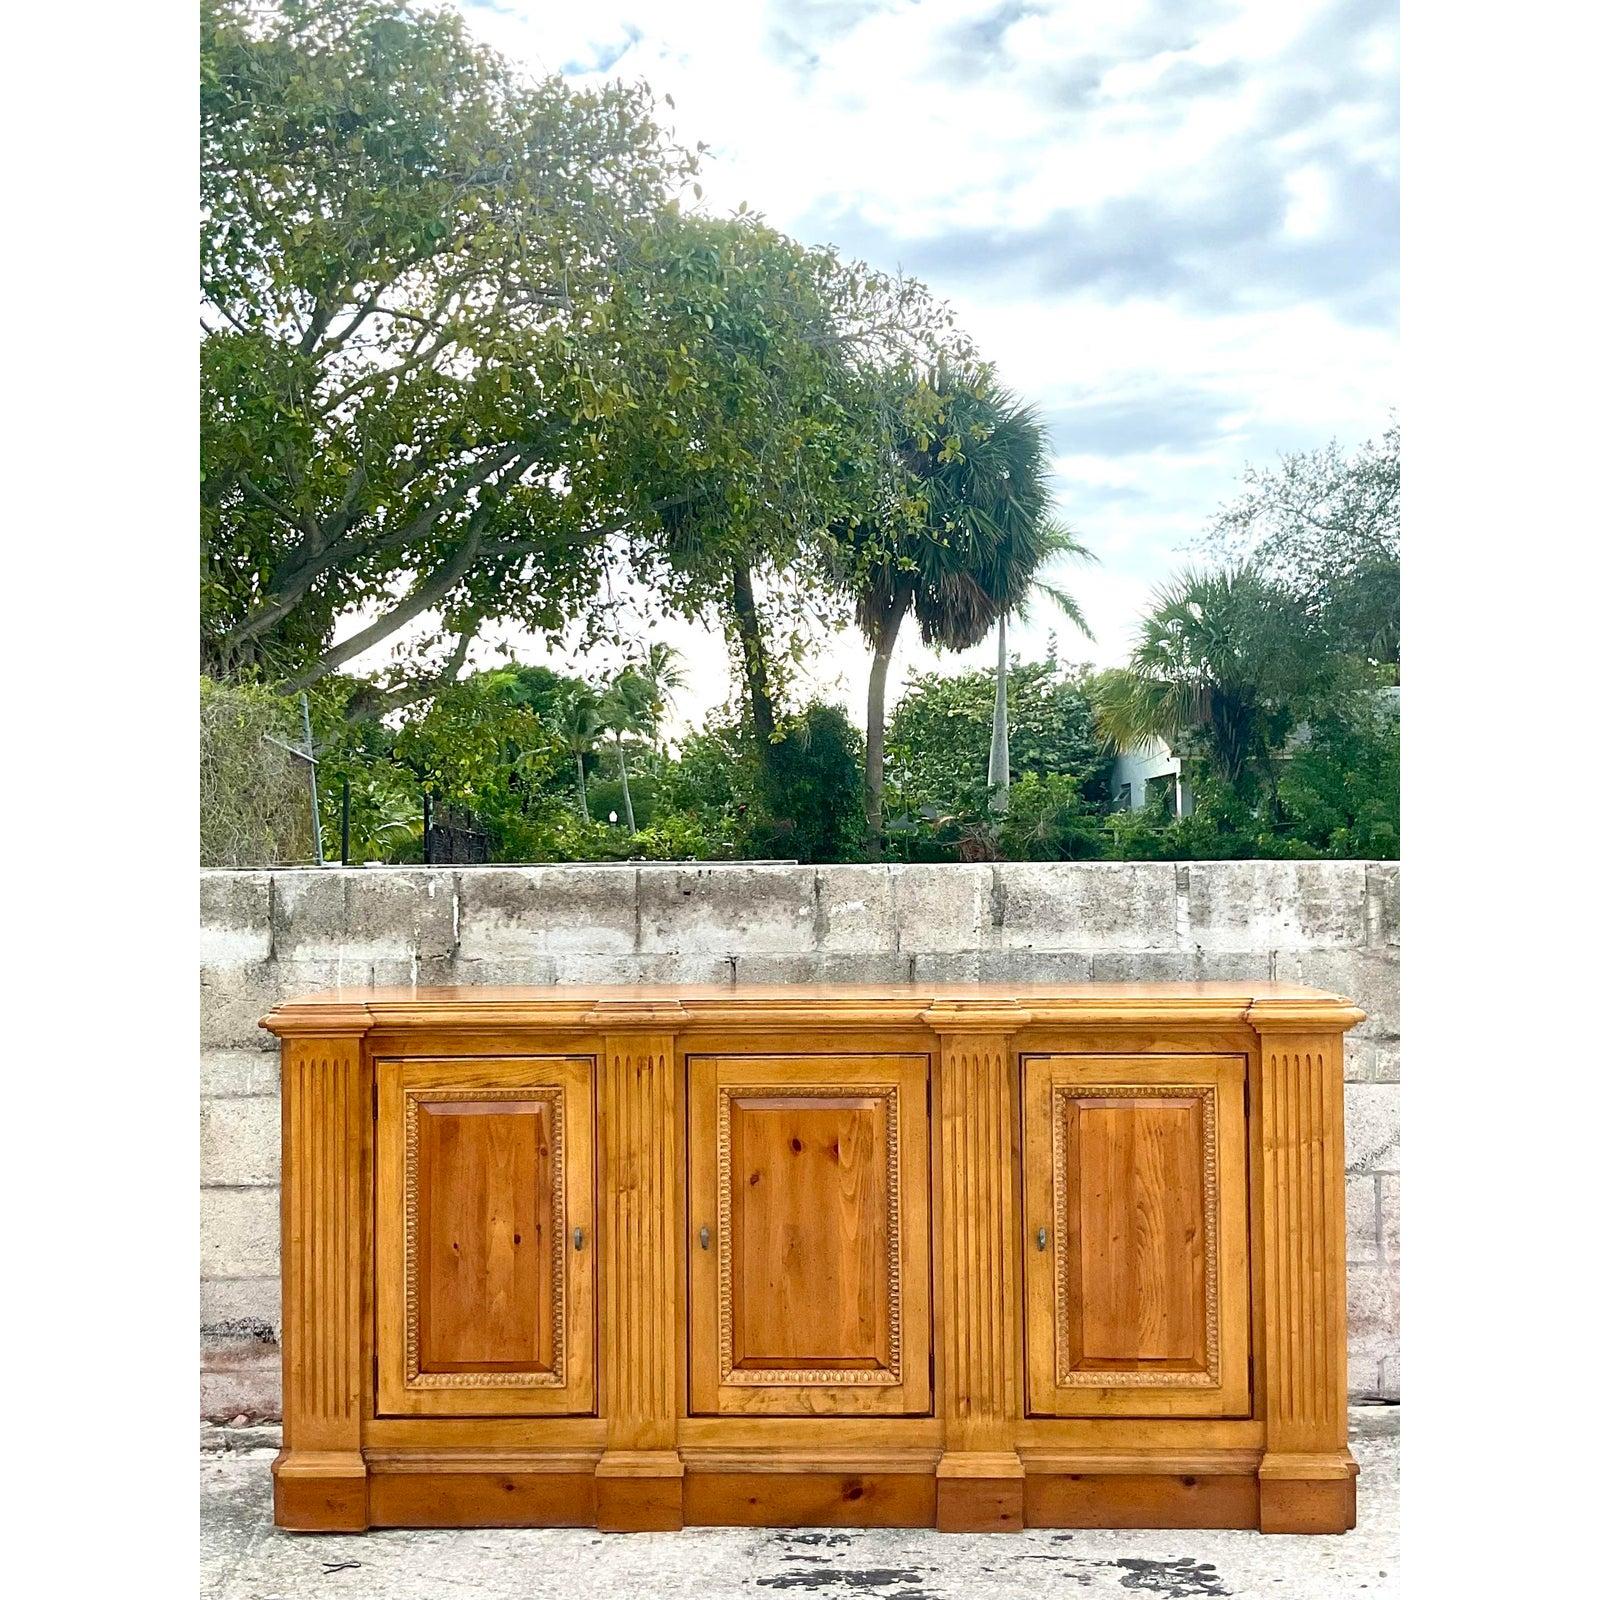 Exceptional vintage Regency pine credenza. Made by the iconic Century Furniture group. Beautiful column detail and stunning wood grain detail. A beautiful warm patina from age. Lots of great storage below. Acquired from a Palm Beach estate.